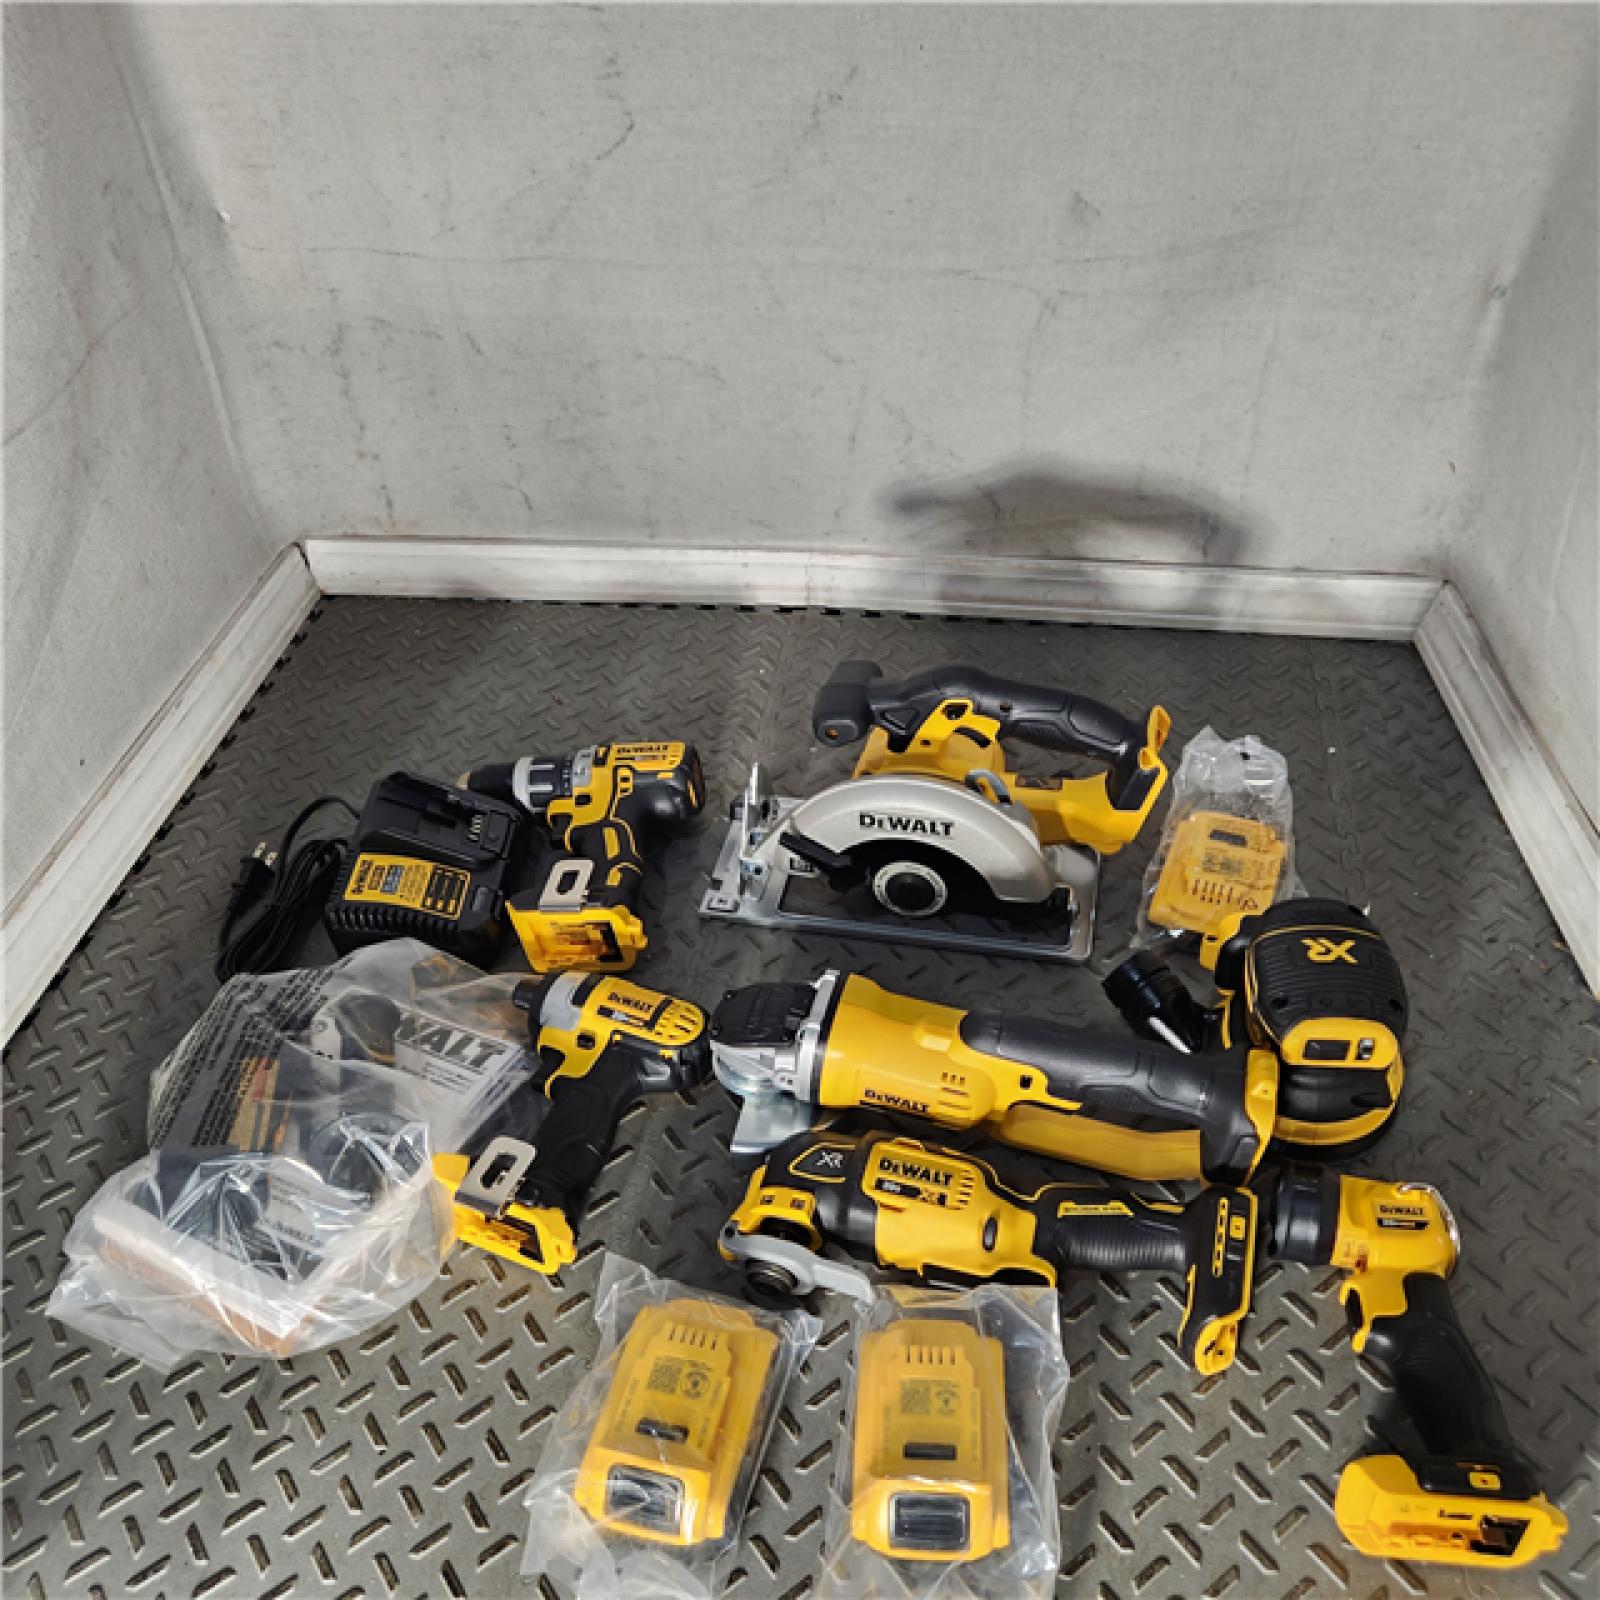 HOUSTON Location-AS-IS-DEWALT 20-Volt MAX Brushless Cordless (6-Tool) Combo Kit w/ ToughSystem 2.0 Case NEW!